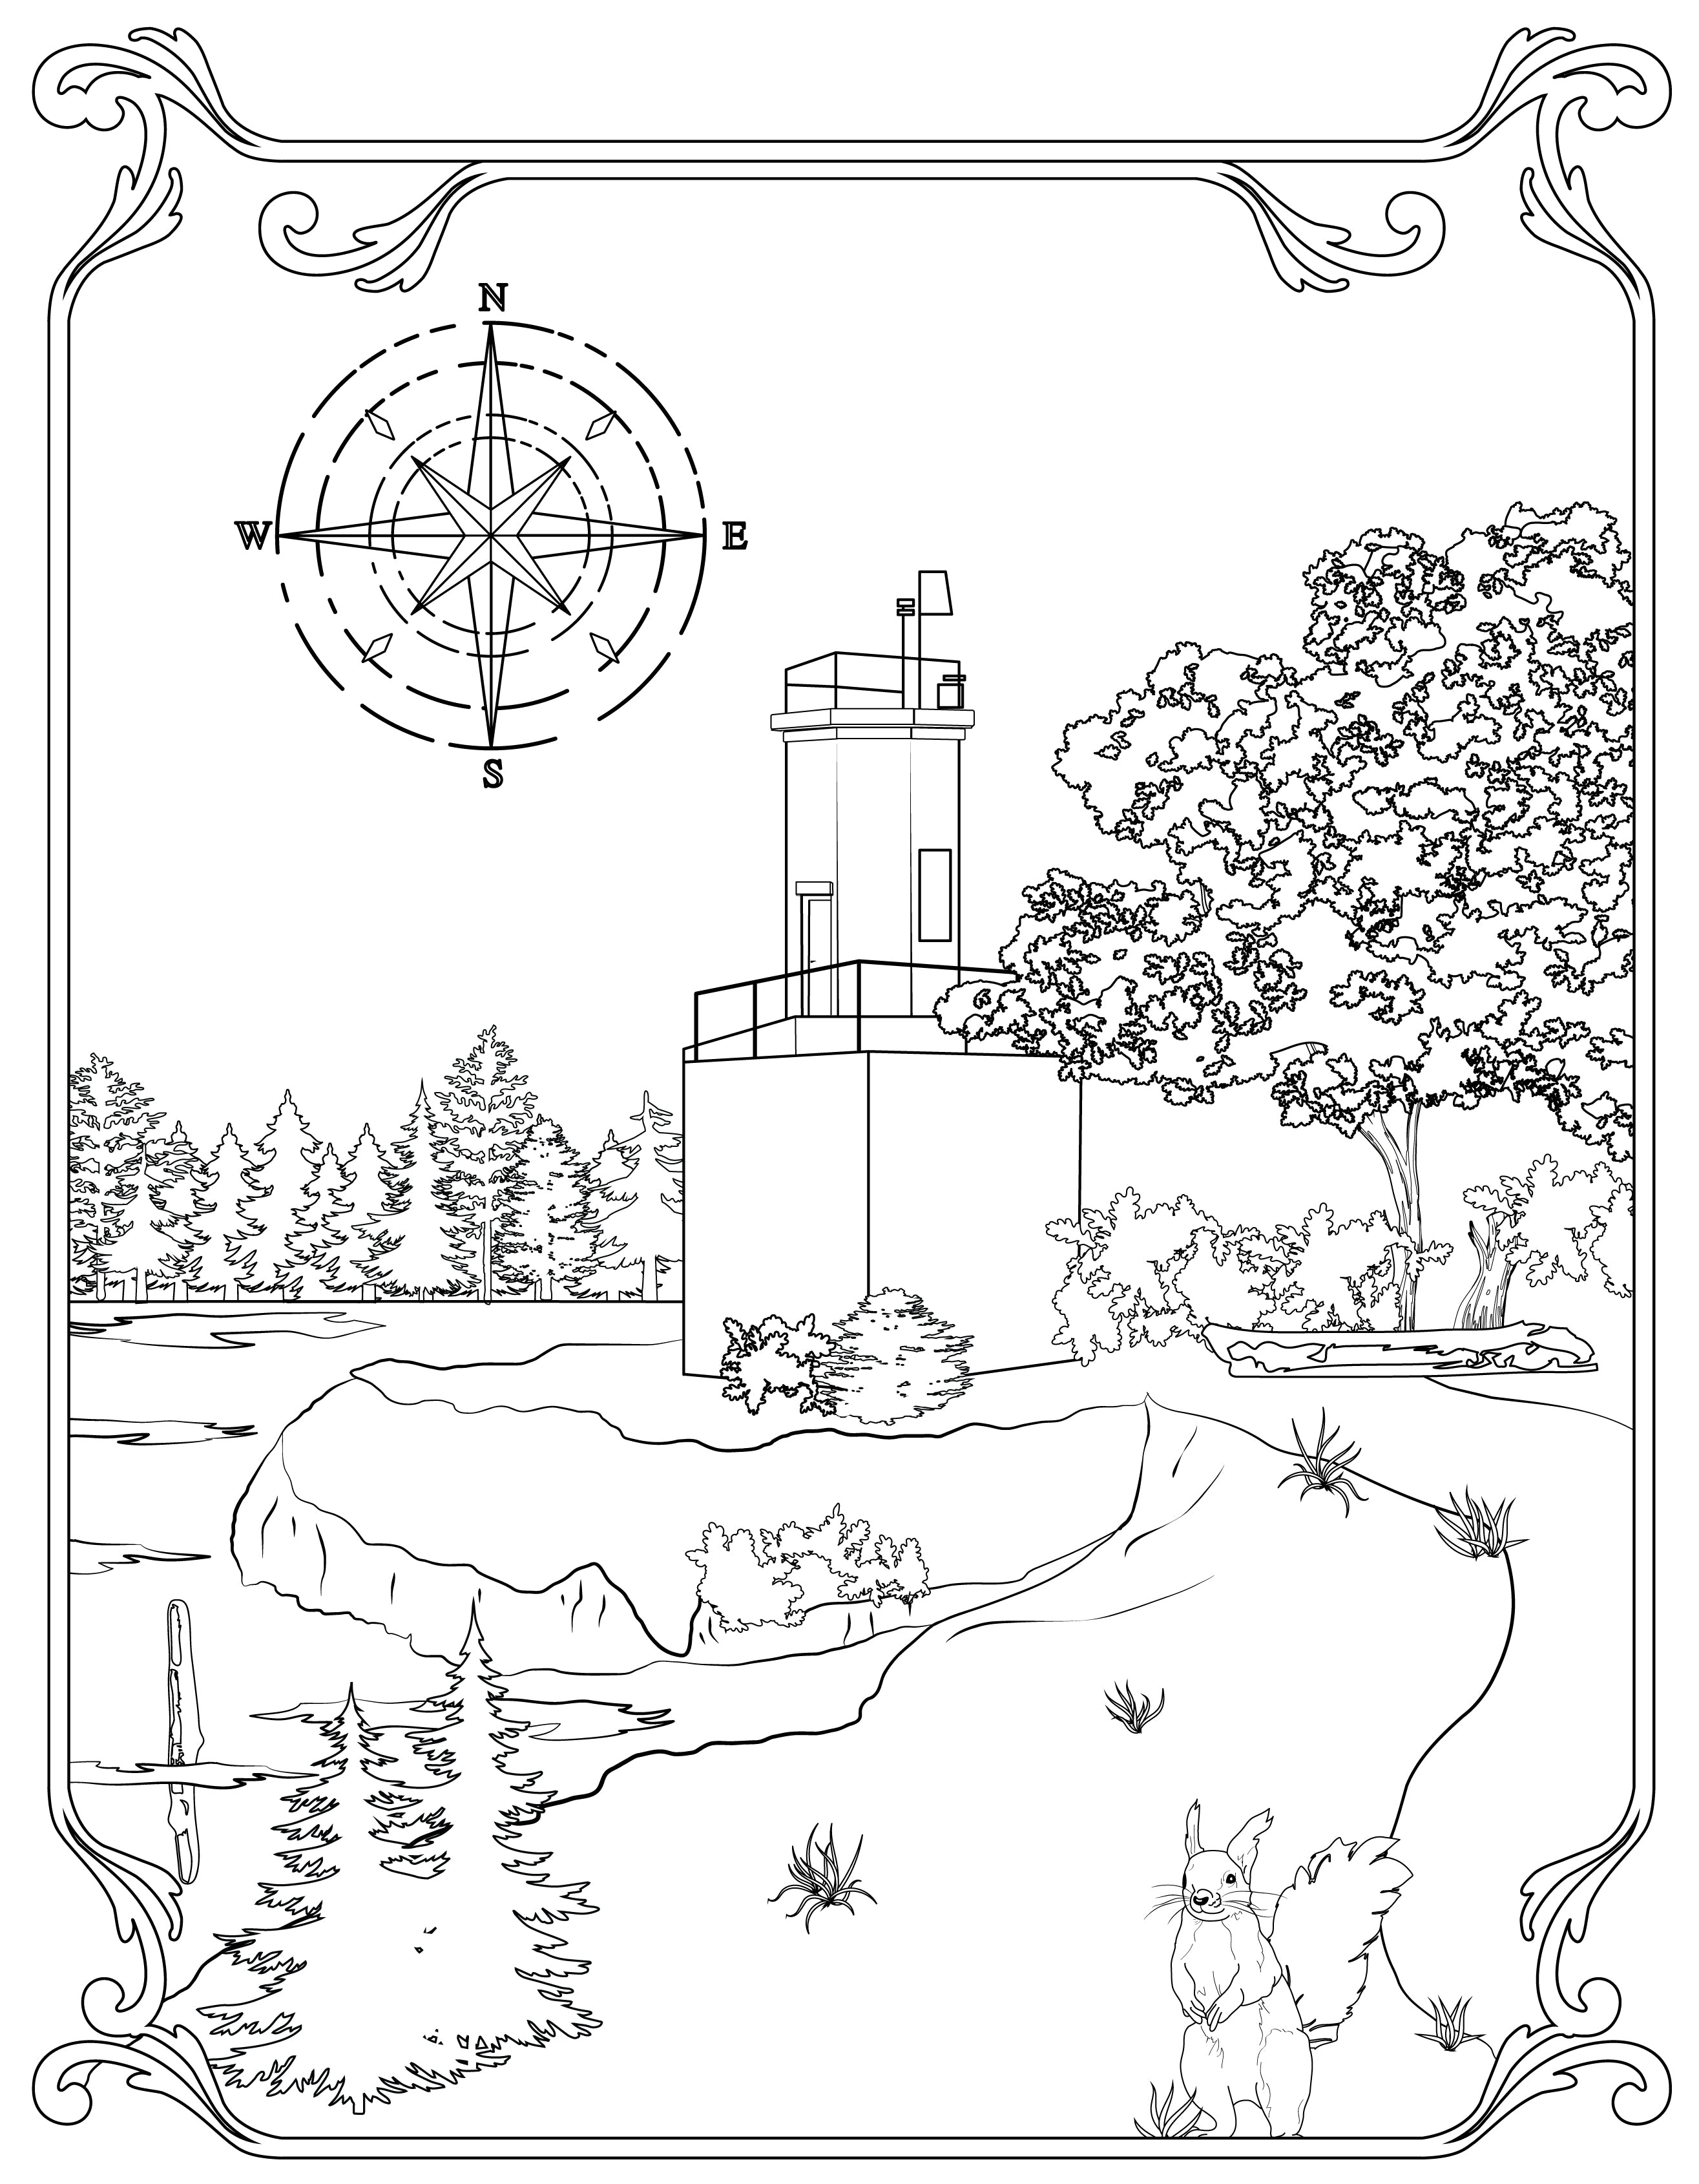 Single Coloring Book Page - Warrior Rock Lighthouse, Oregon - Digital Print-from-Home